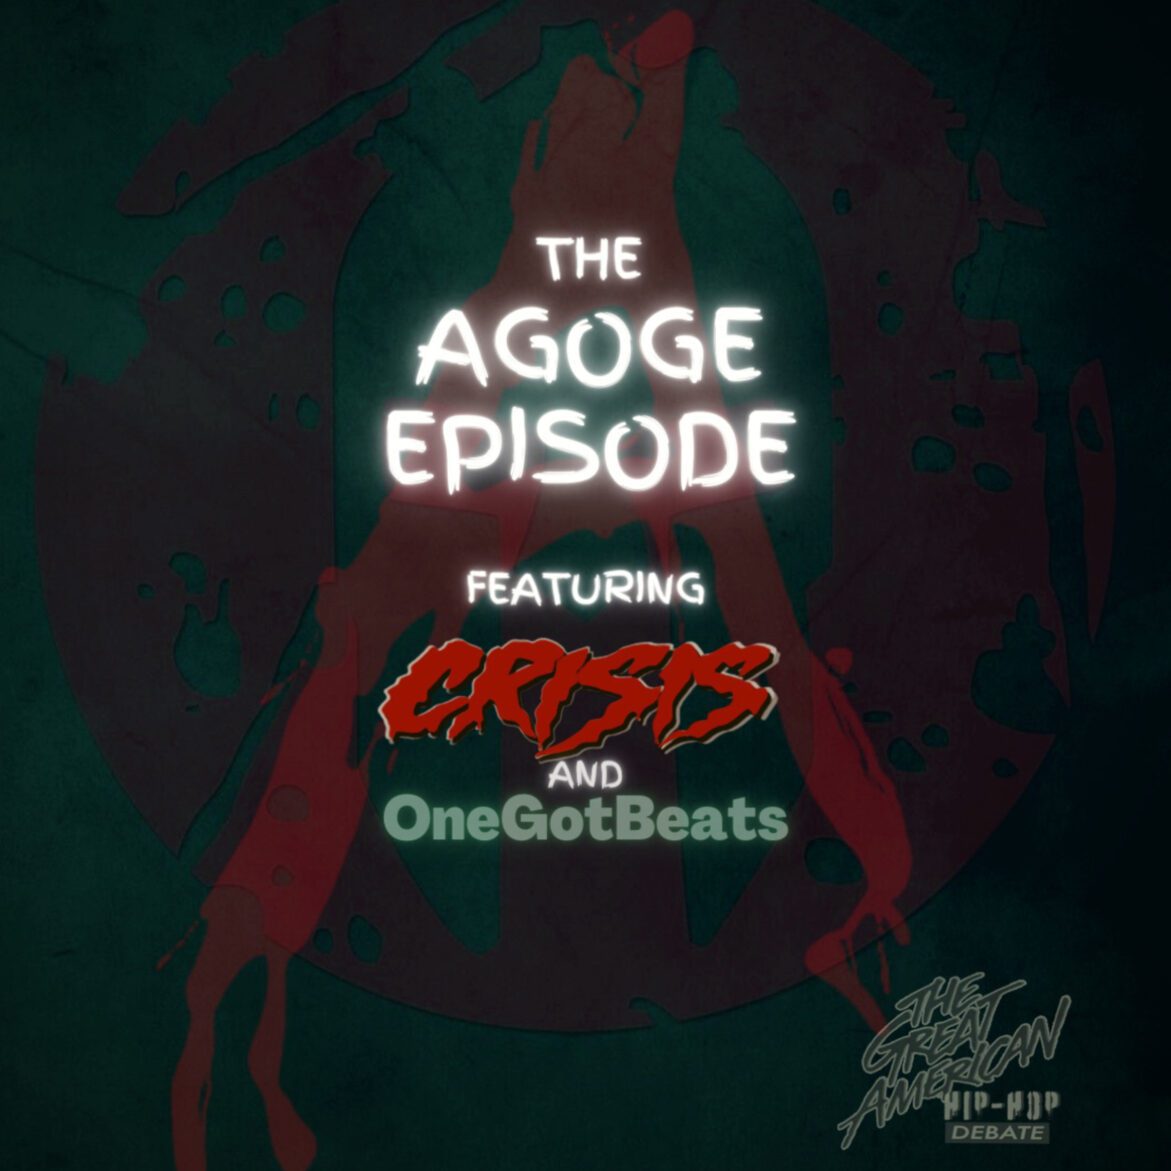 Black Podcasting - Ep. 75 The Agoge Episode: Interview with Crisis & OneGotBeats (Part 1)